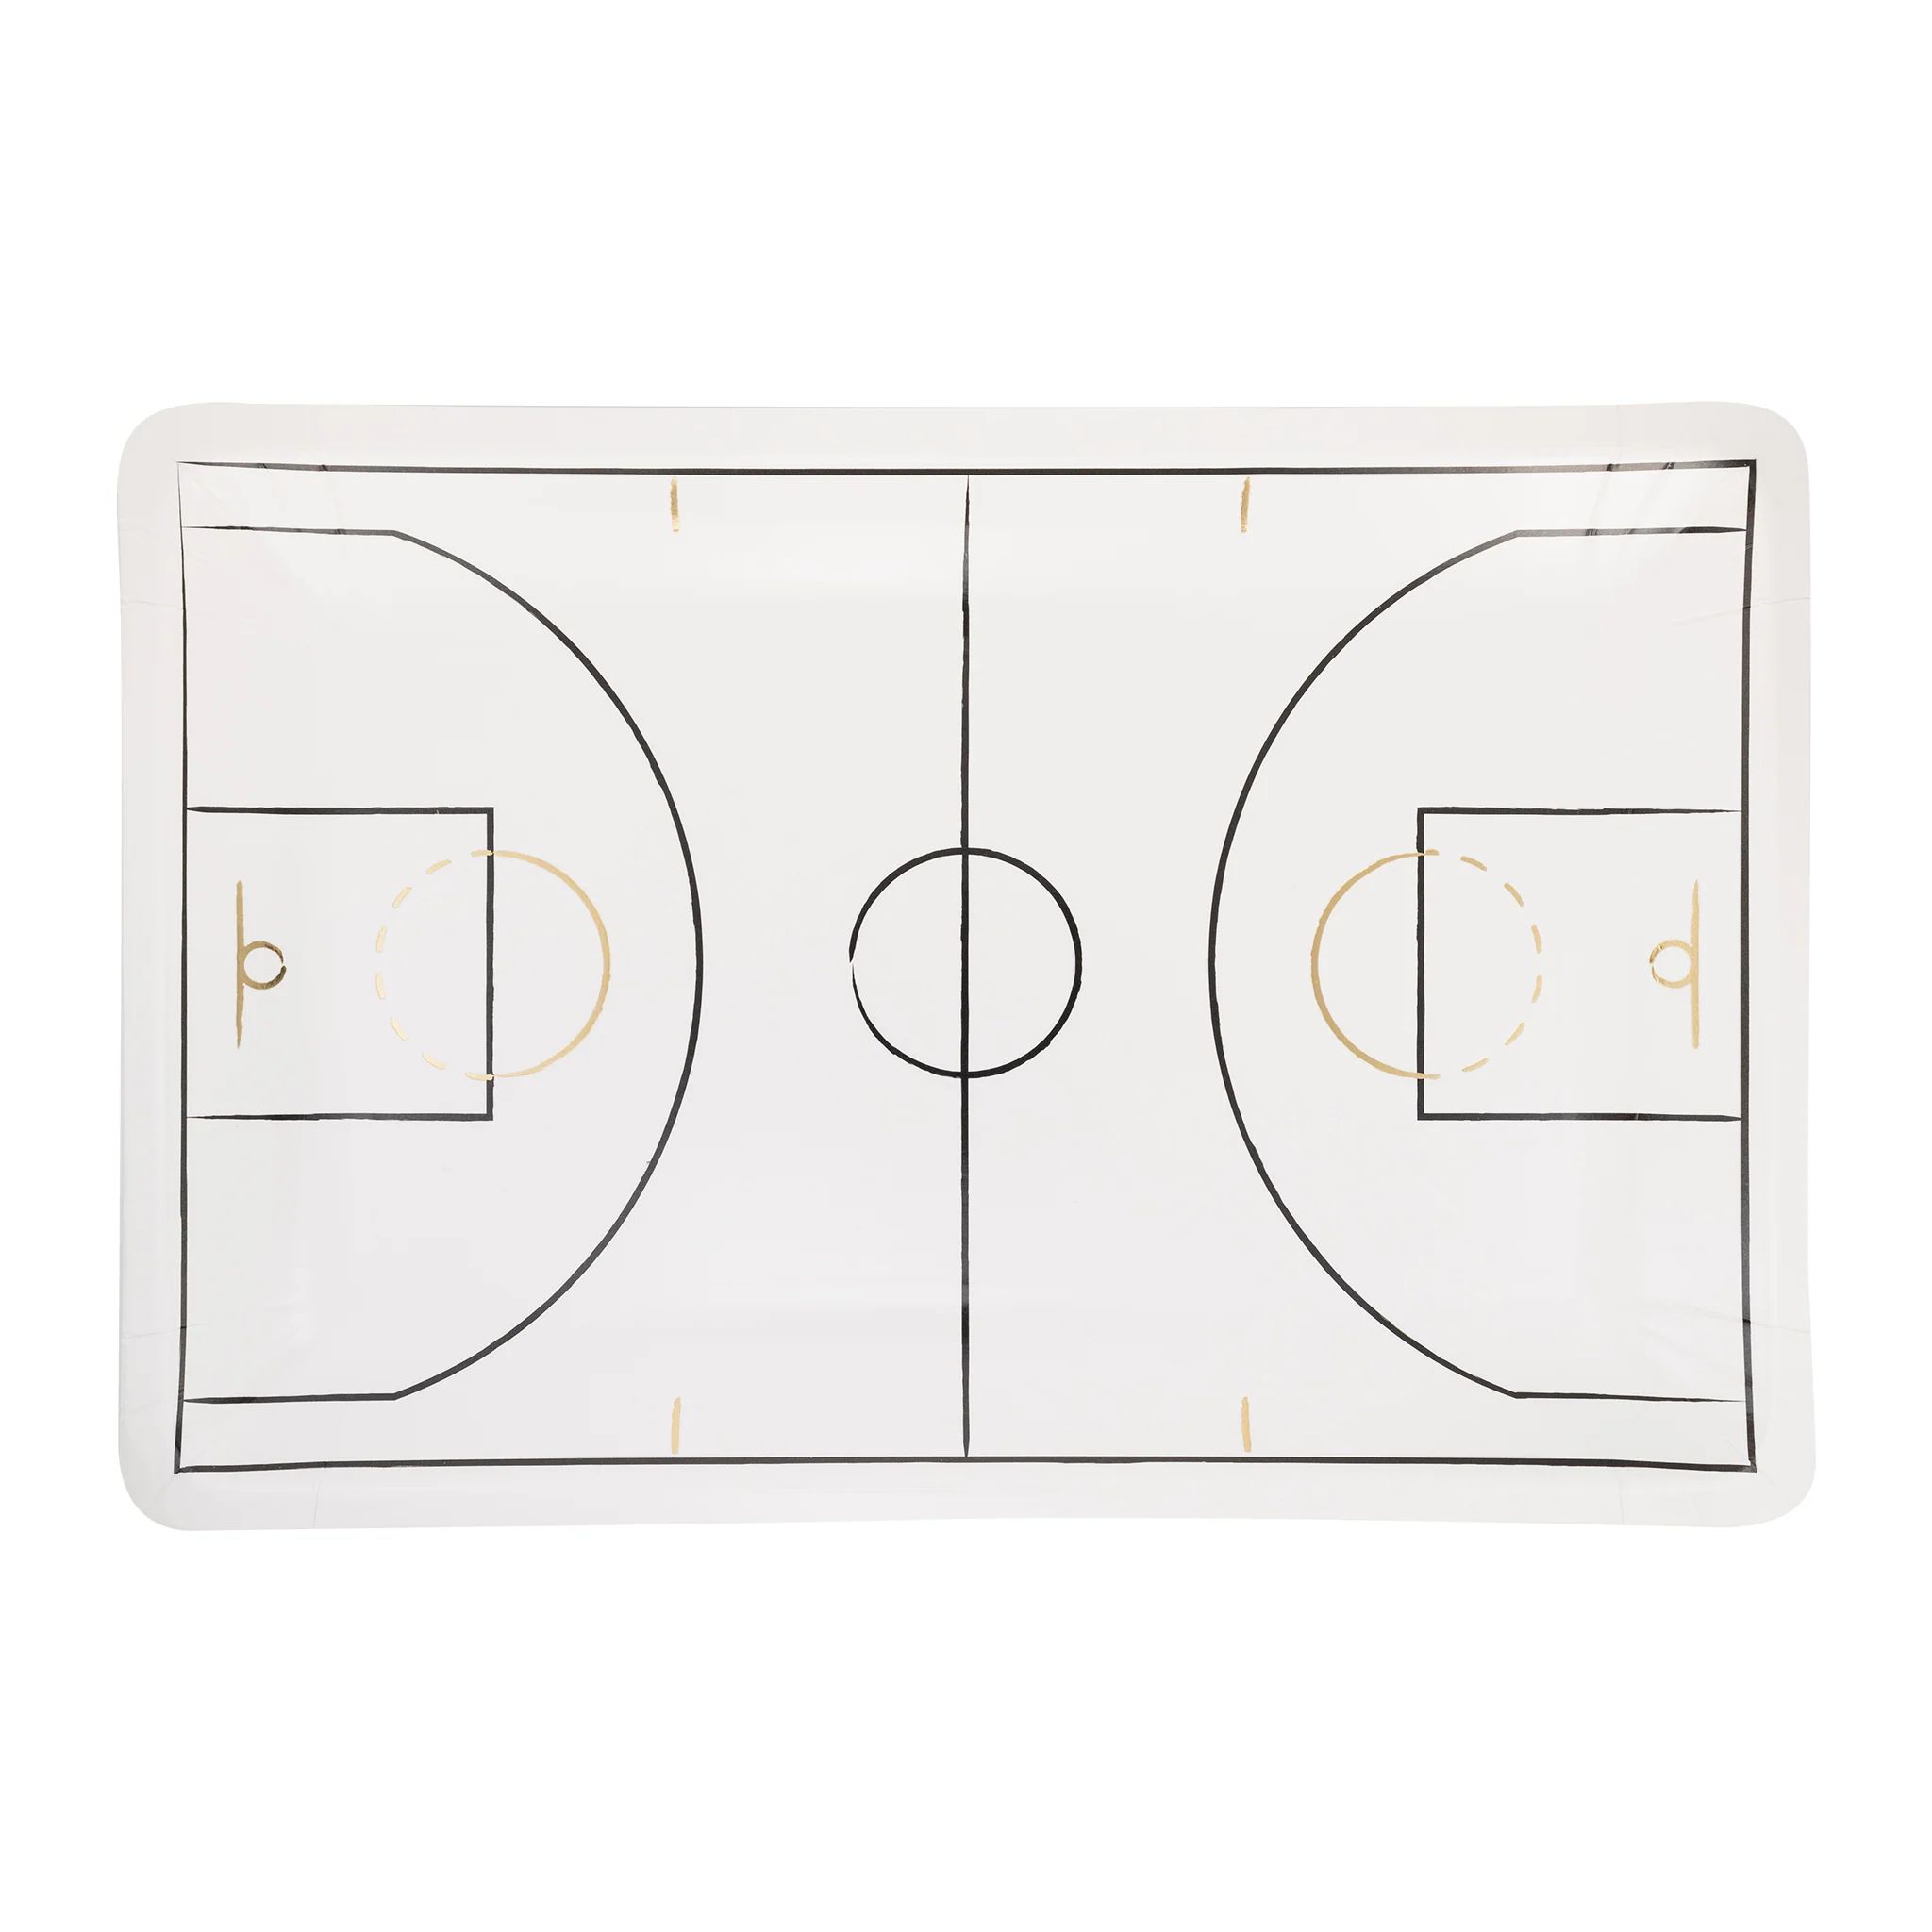 Basketball Court Shaped Paper Plate | My Mind's Eye